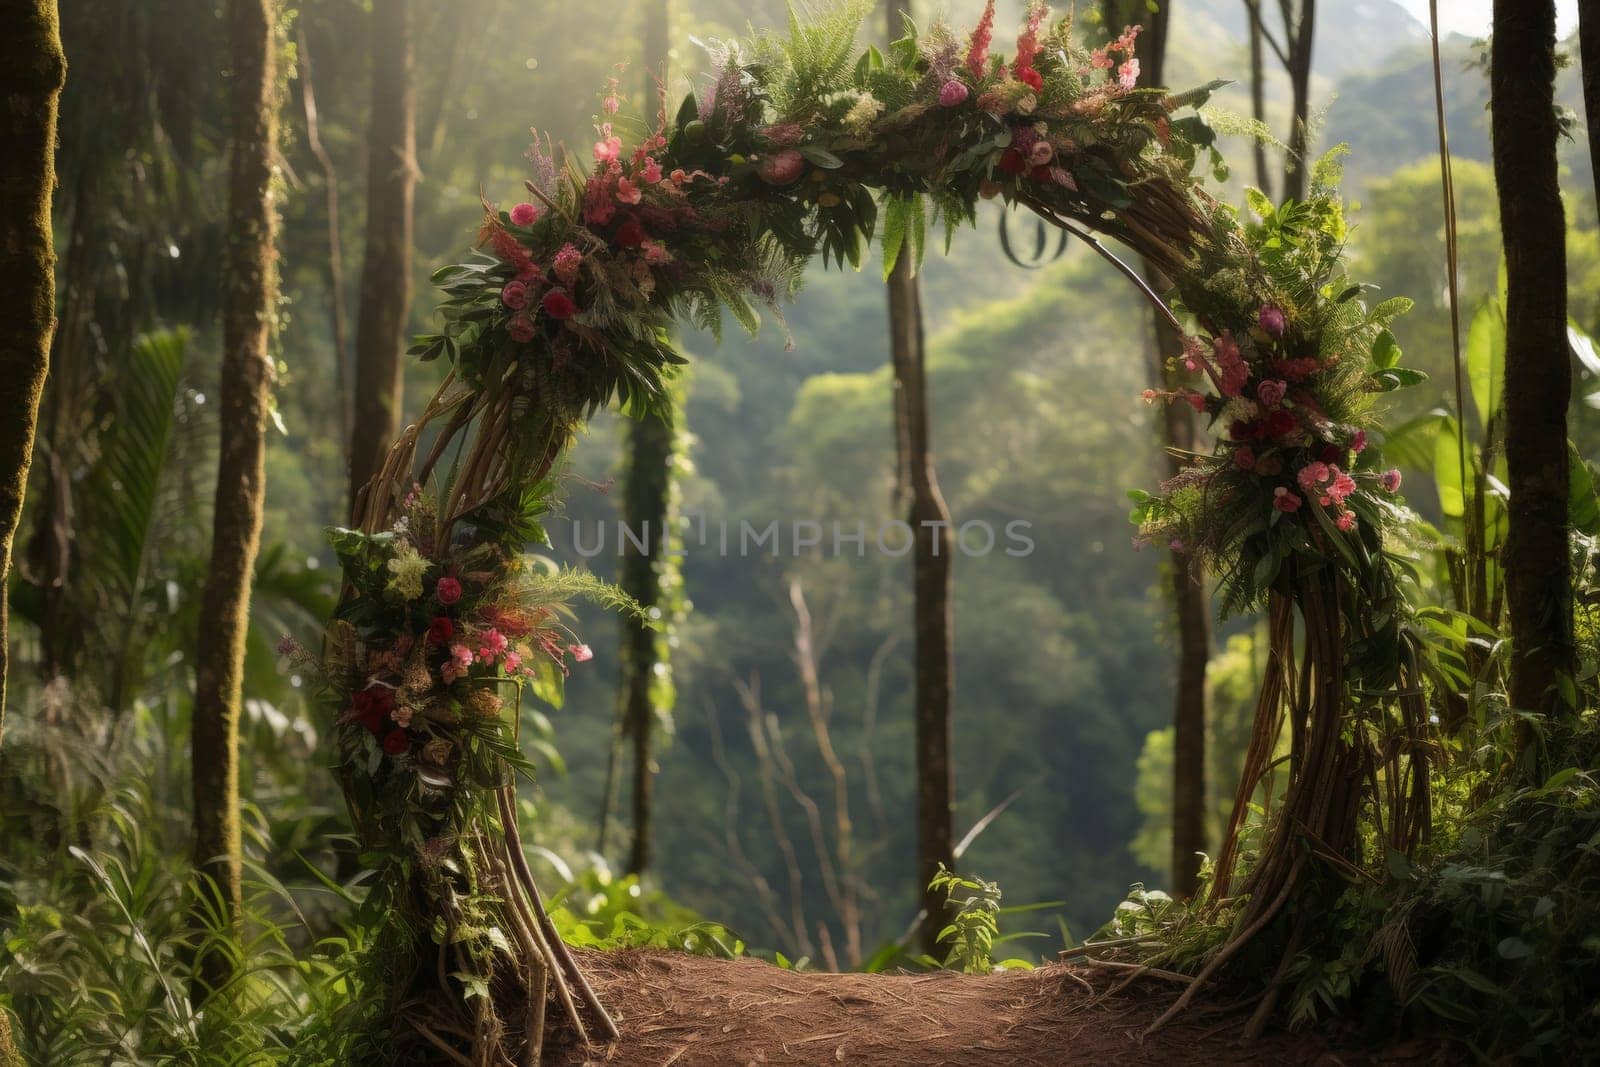 Exquisite tropical wedding arch decor amidst lush green jungle setting for unforgettable ceremony